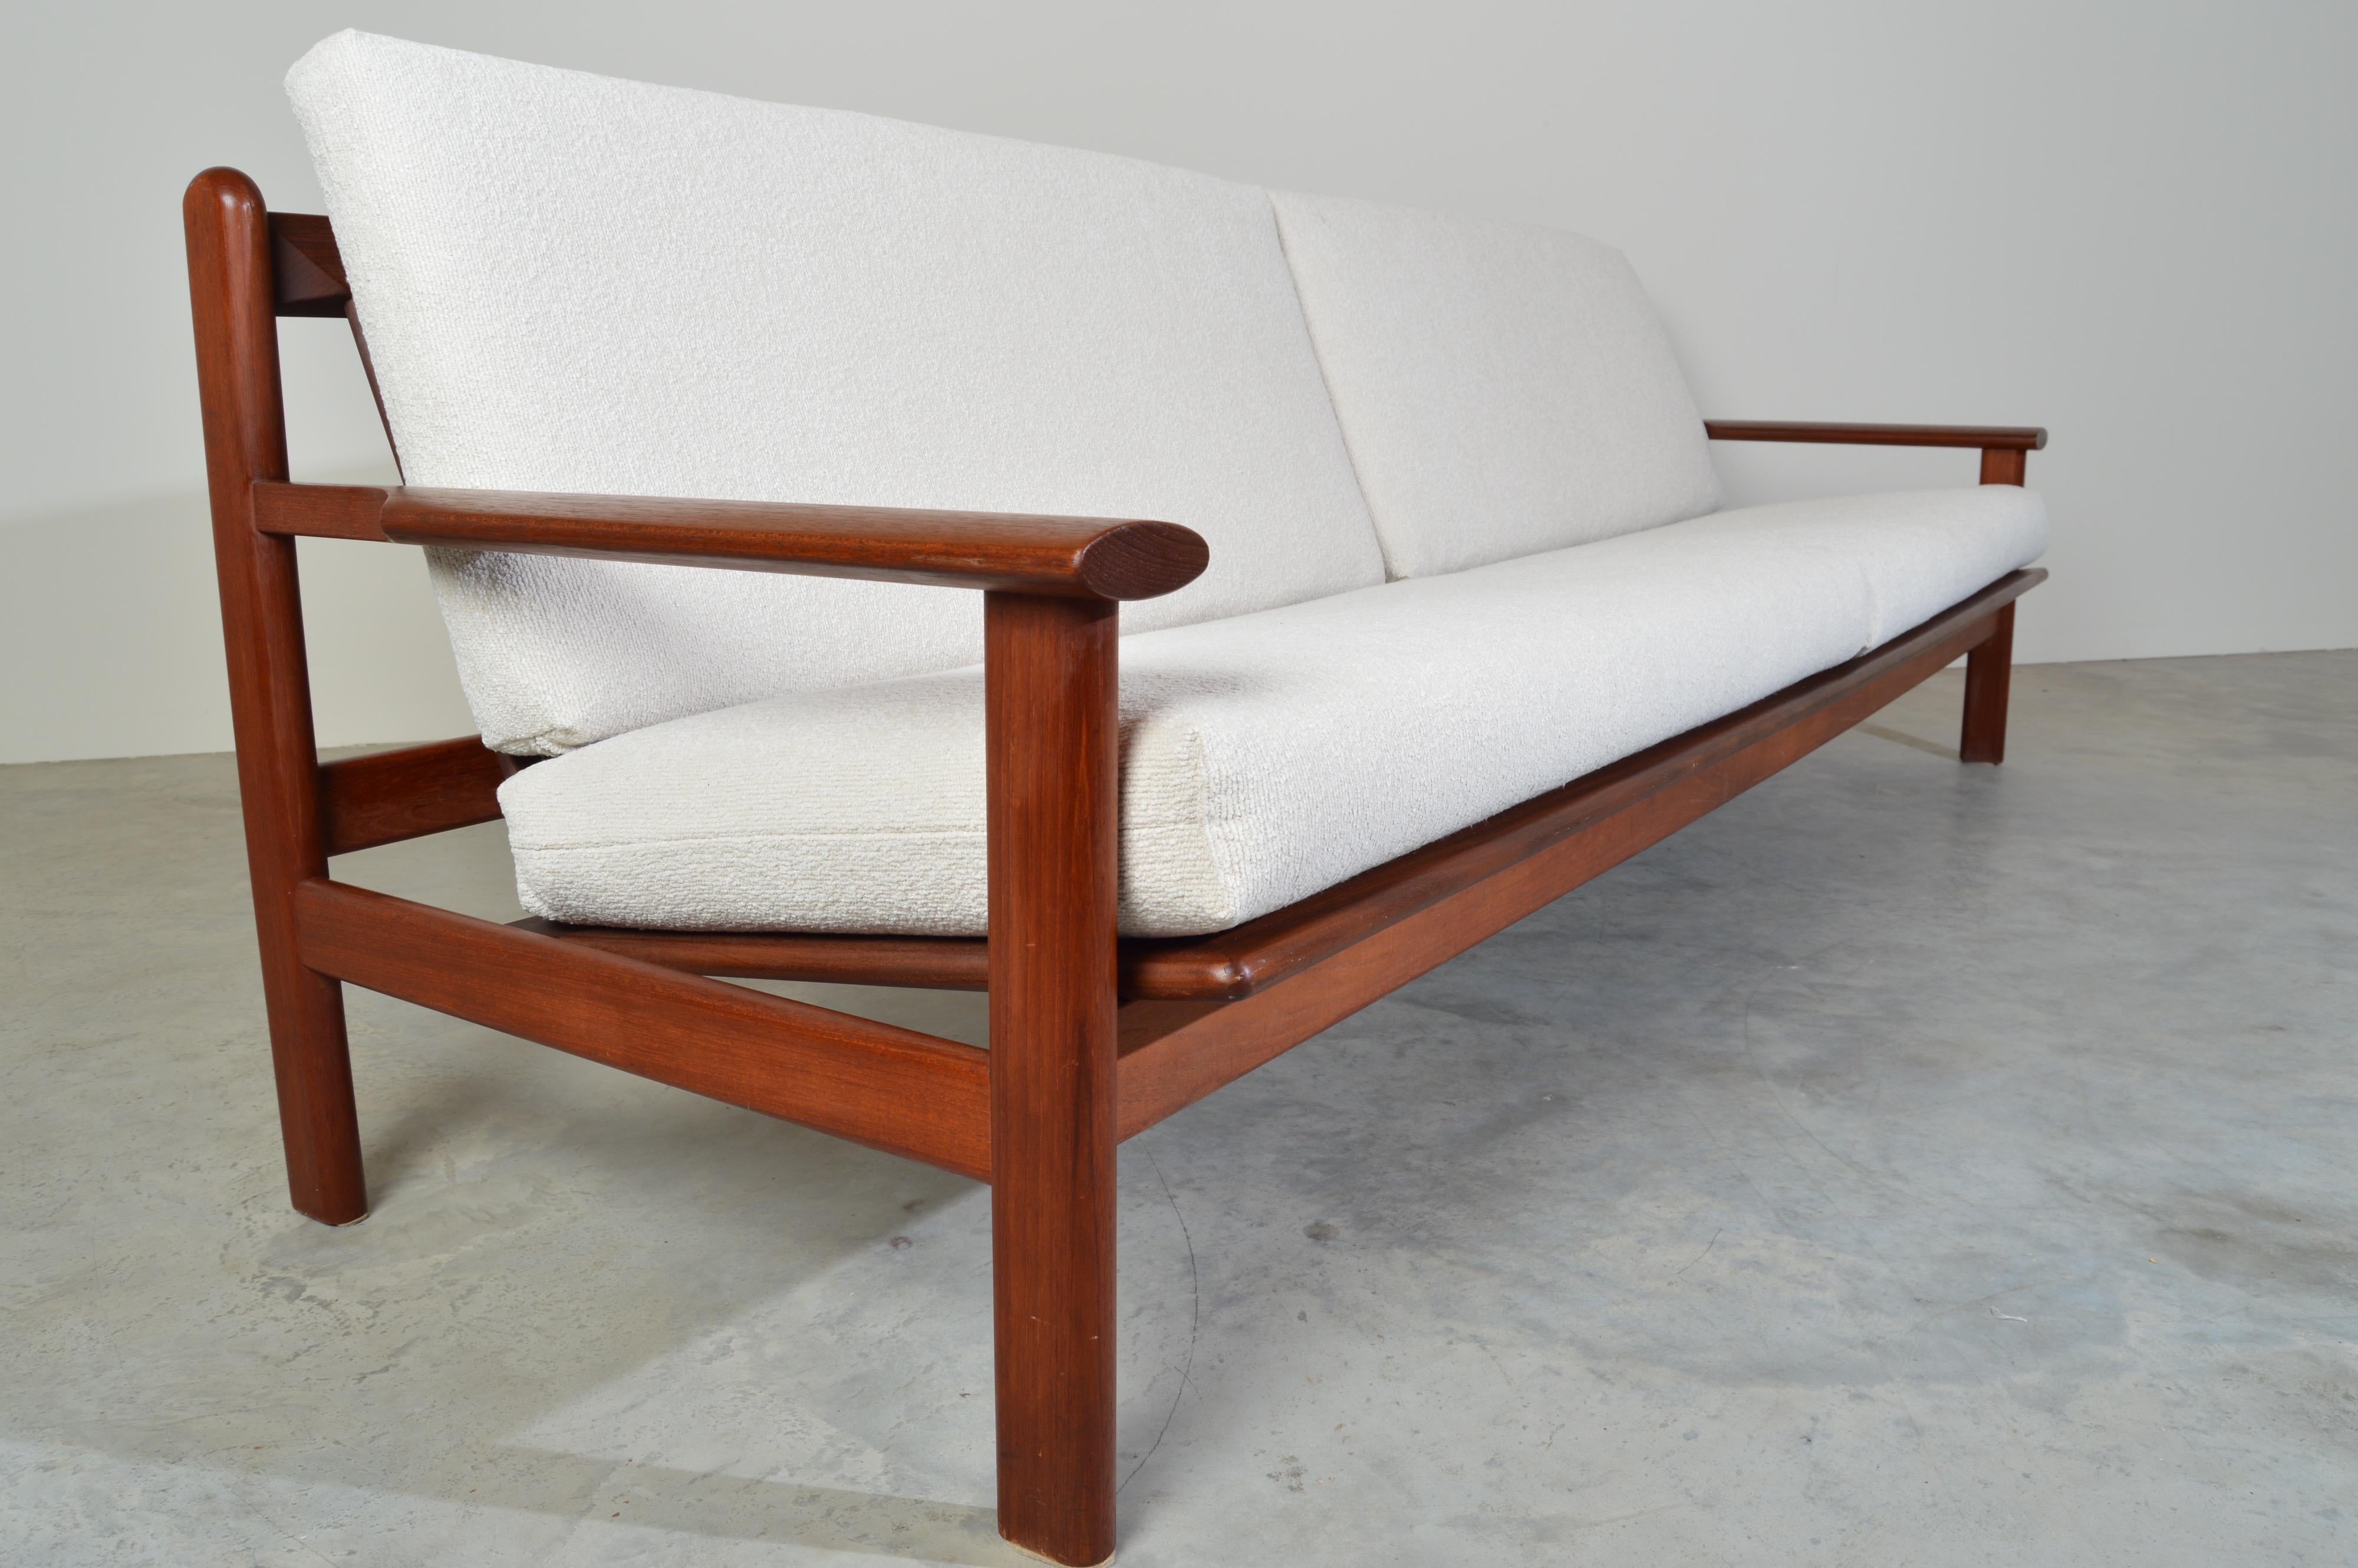 Mid-20th Century Poul Volther Danish Modern Sculptural Teak Sofa in Italian Boucle